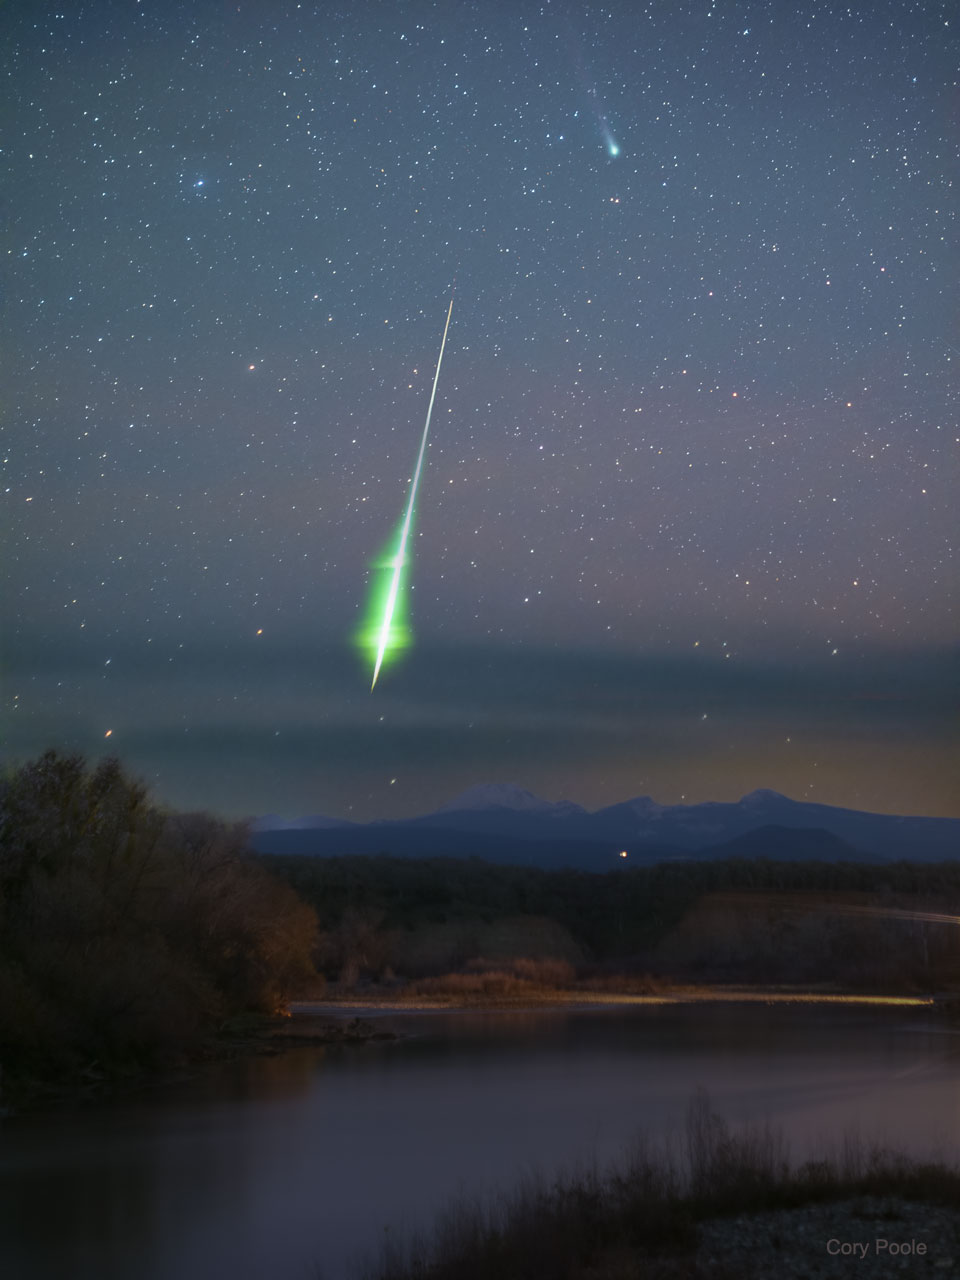 The featured image shows Comet Leonard in the backround
with a bright green fireball meteor in the foreground. The
image was taken from northern California, USA.
Please see the explanation for more detailed information.